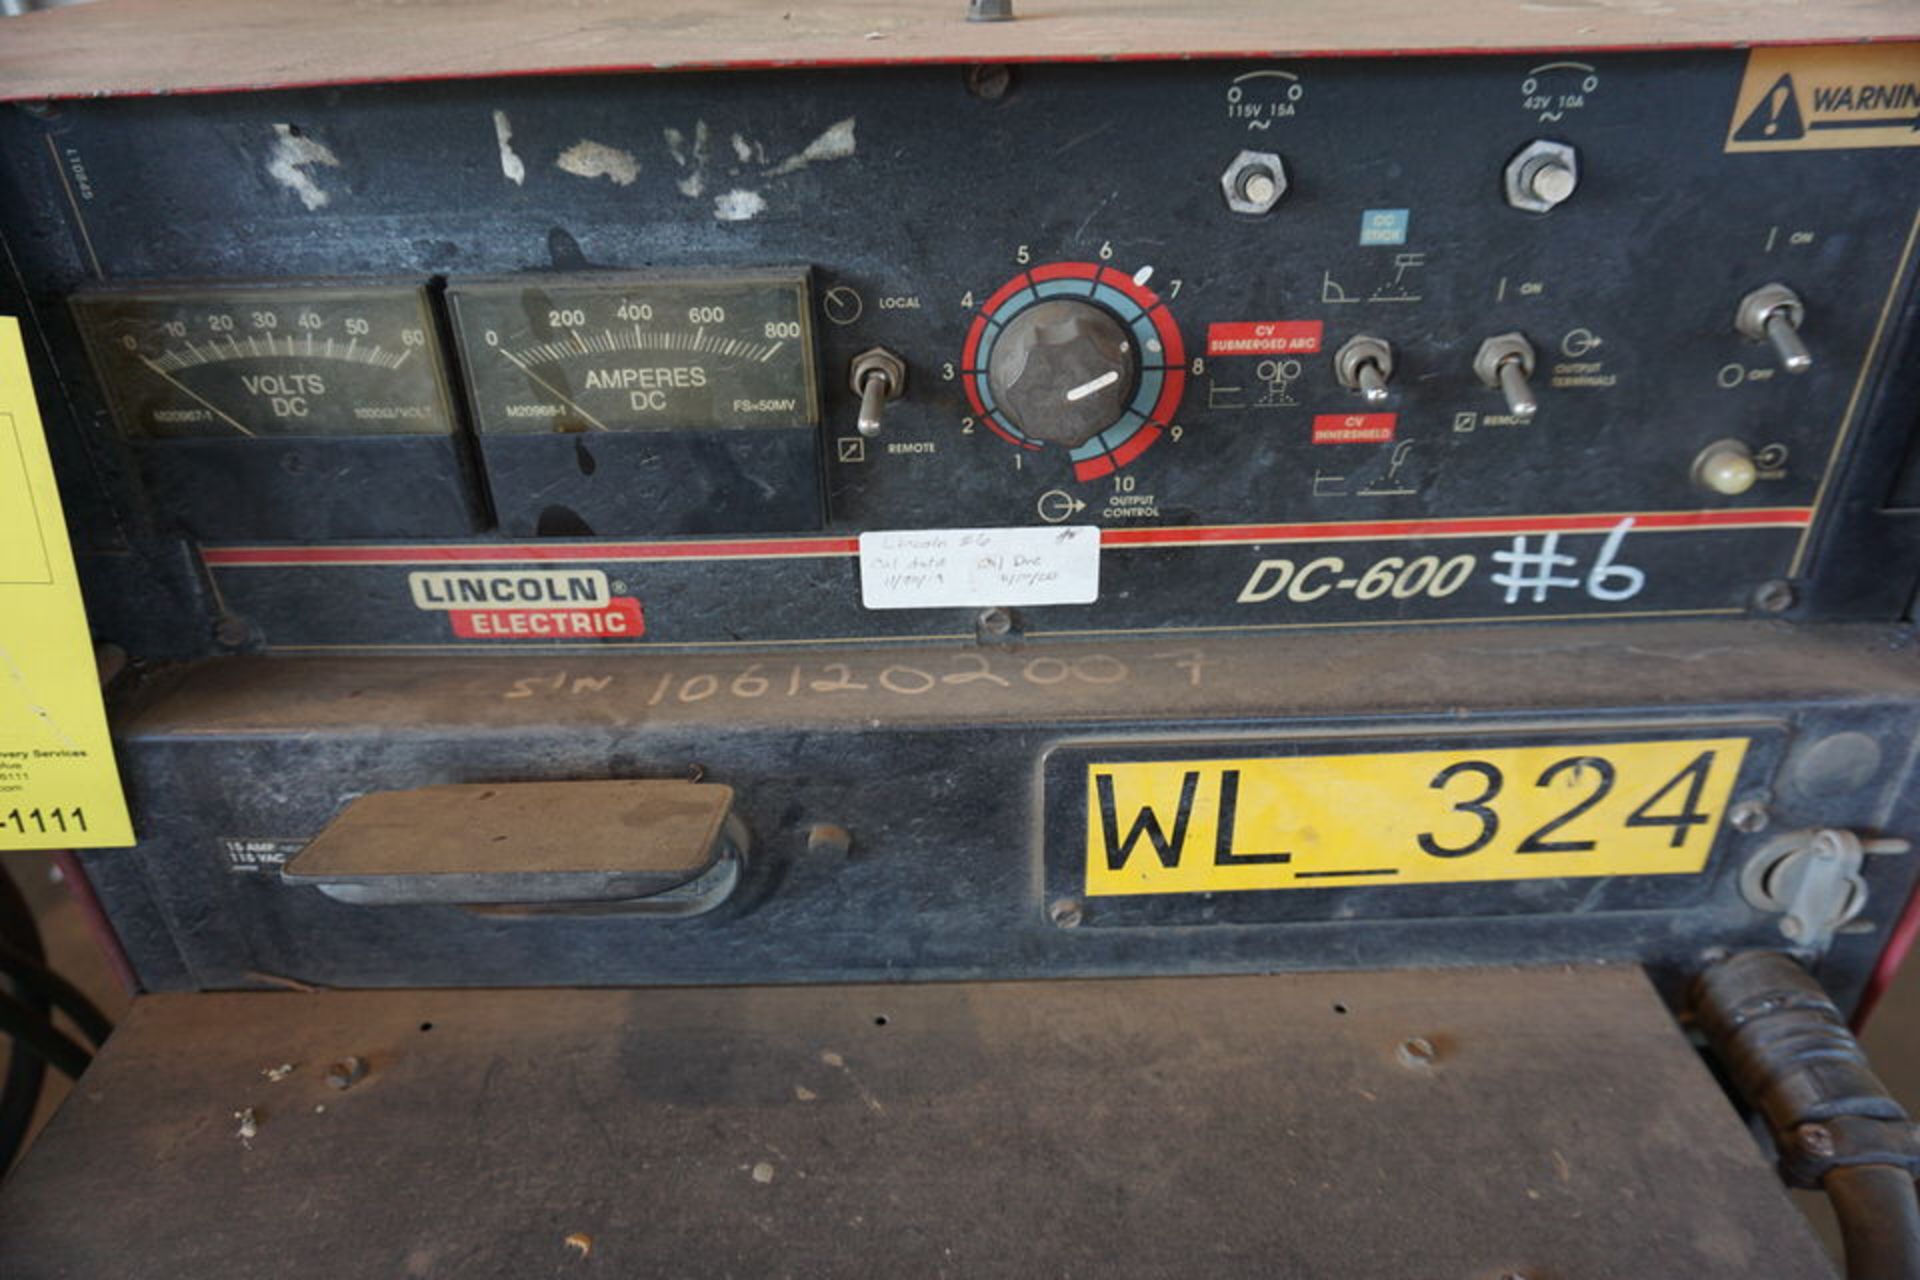 LINCOLN ELEC DC-600 WIRE WELDE R W/ LF72 WIRE FEEDER - Image 2 of 2